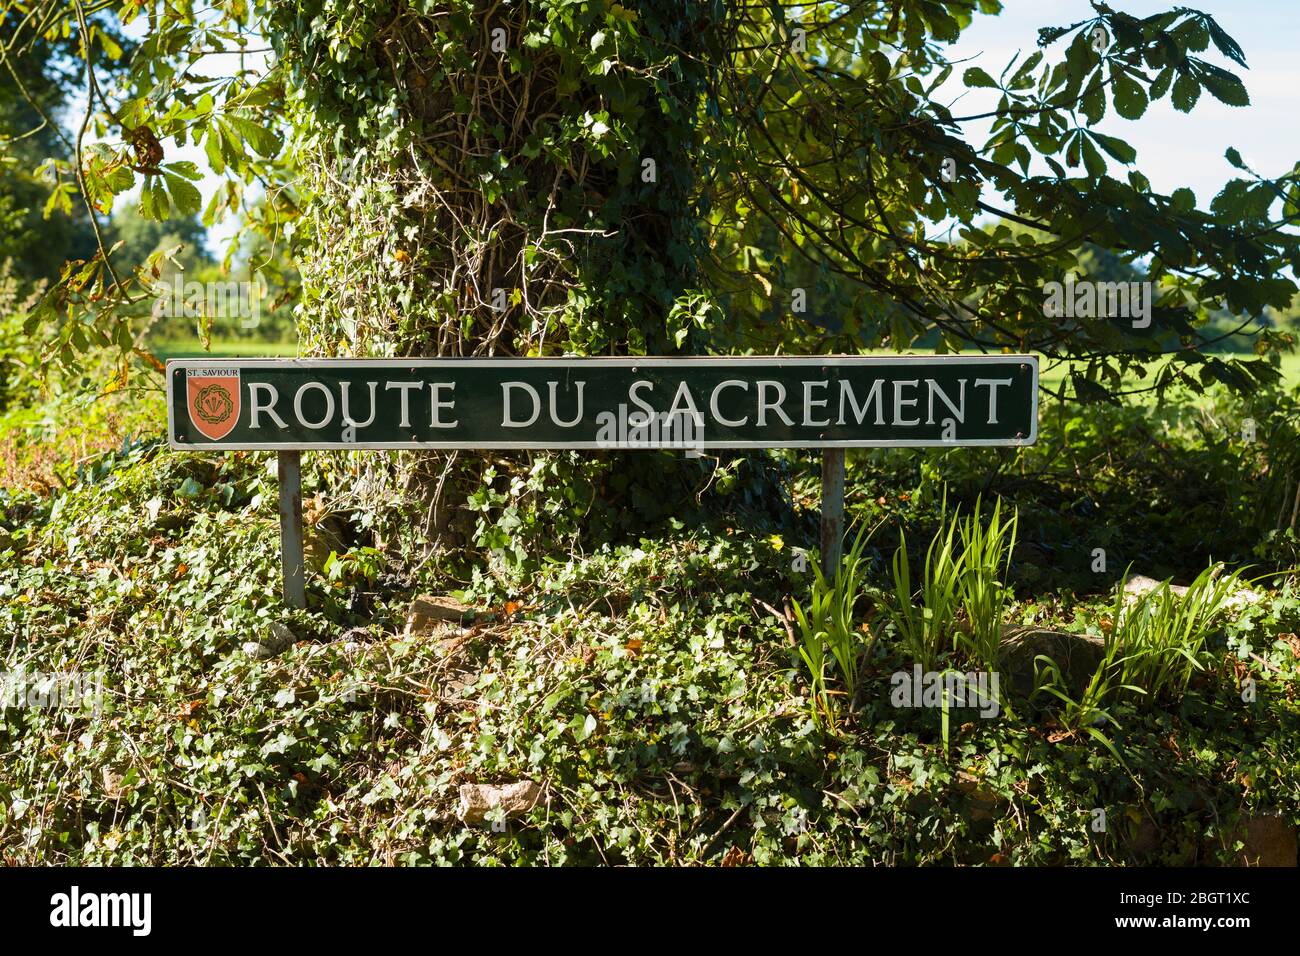 Route du Sacrement, French road name sign in St Saviour region of Jersey, Channel Isles Stock Photo